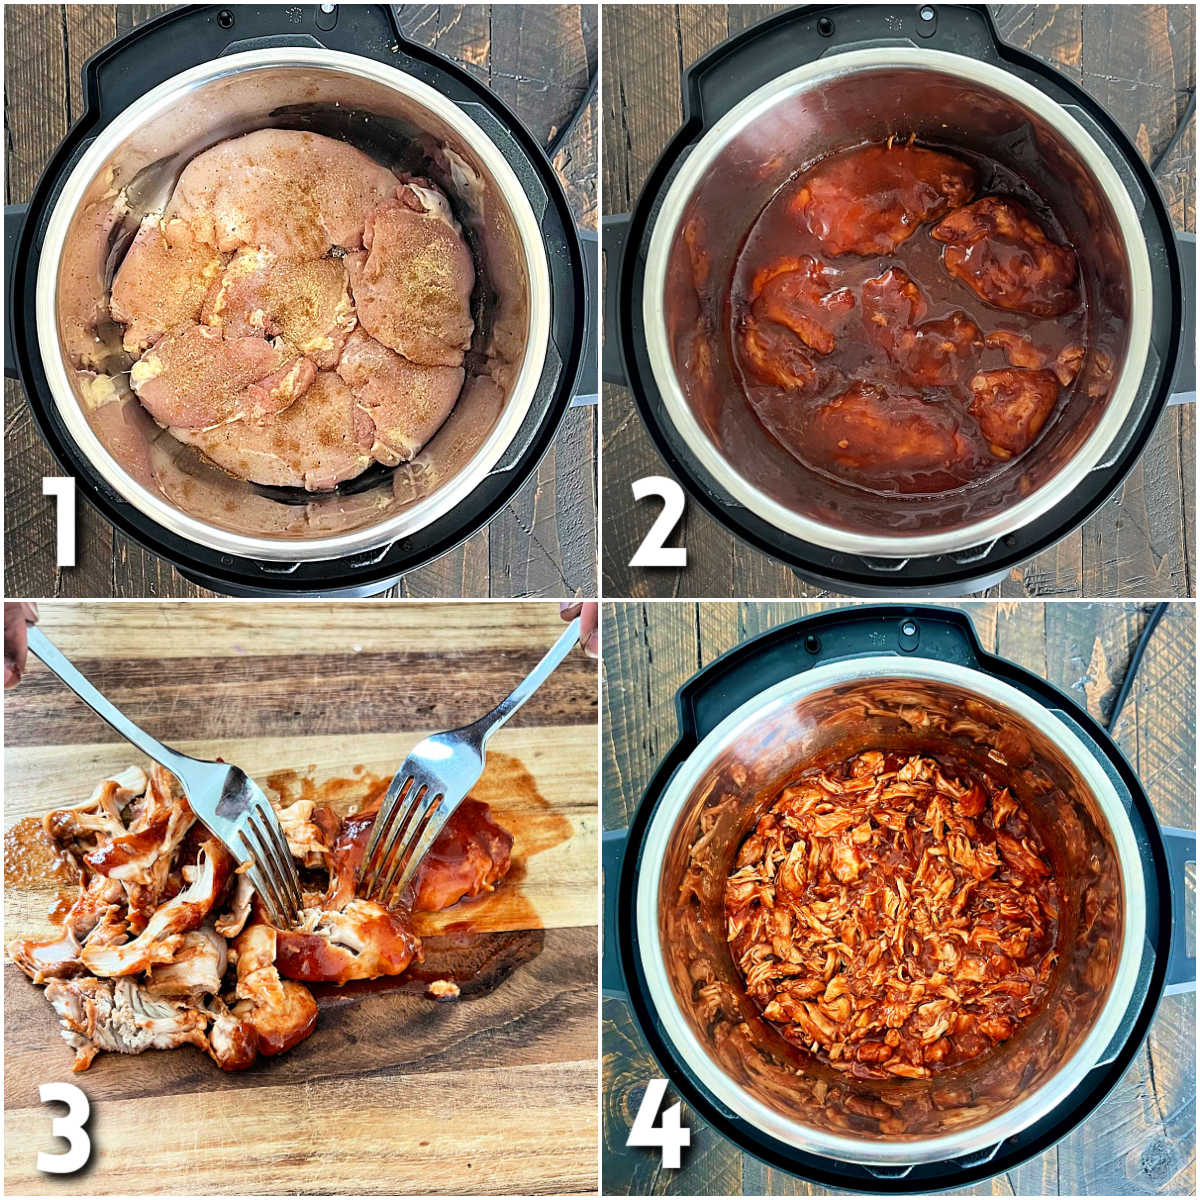 Steps 1-4 how to make slow cooker pulled chicken.